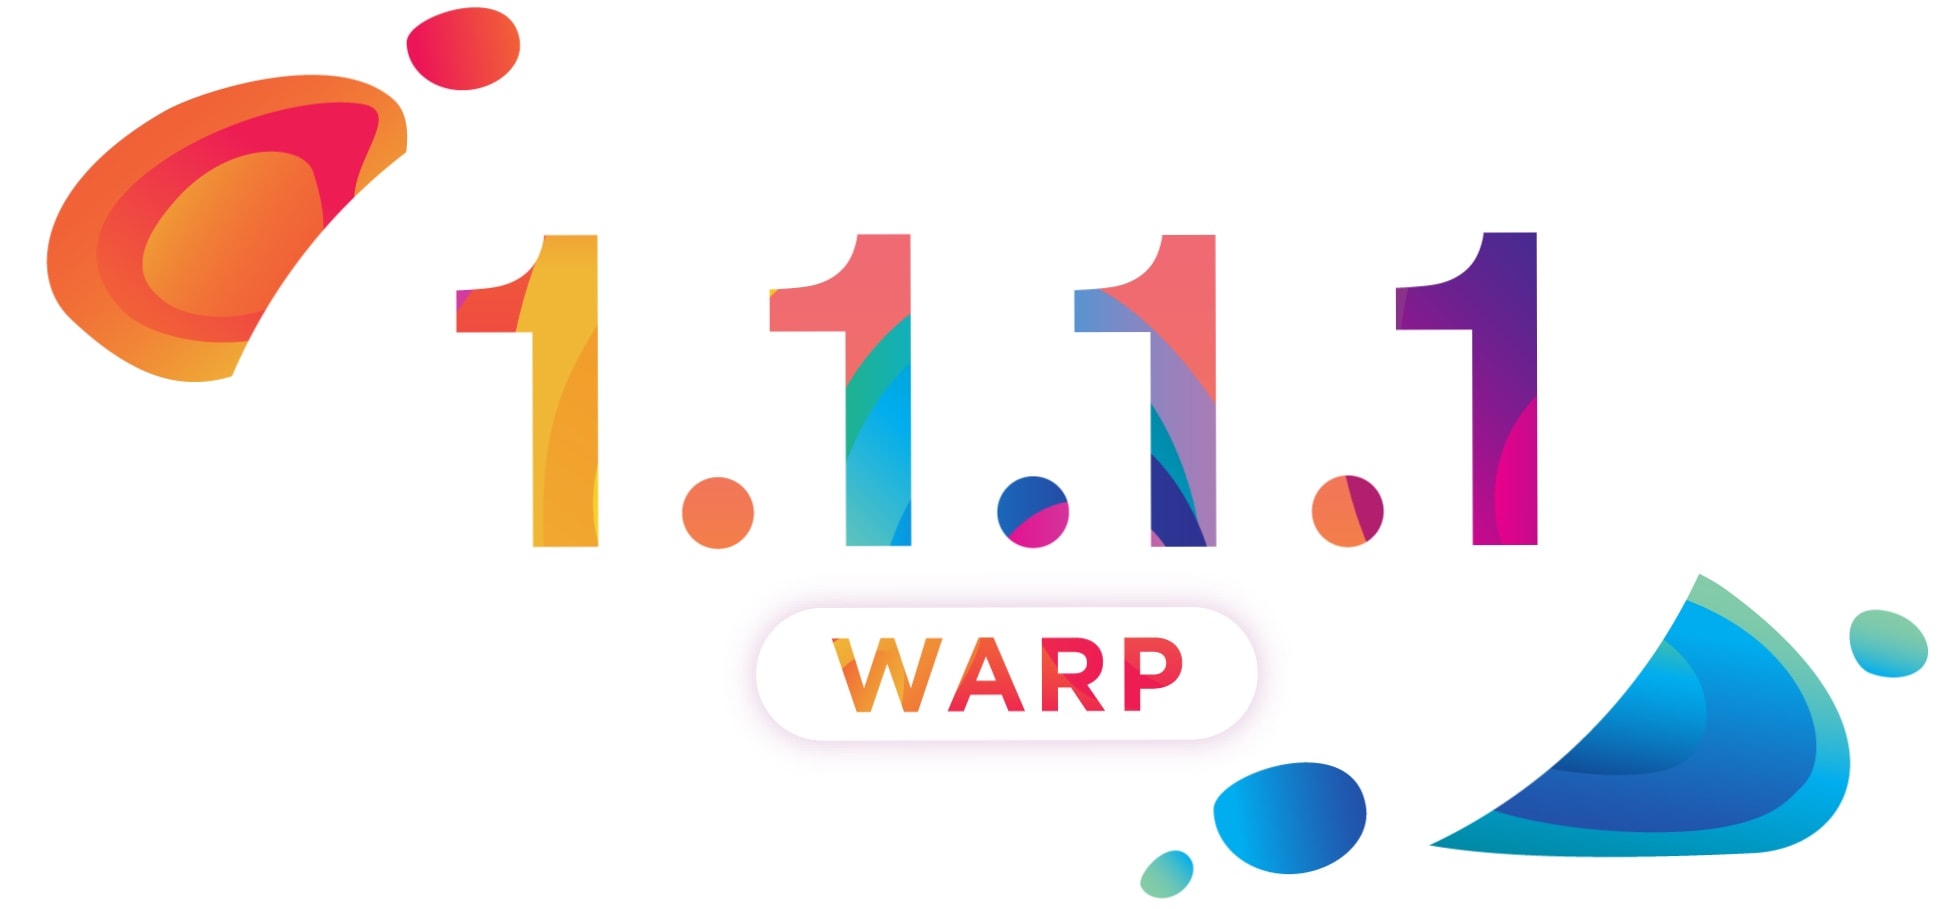 Cloudflare‘s 1.1.1.1 App with Warp adds encryption for safer iPhone internet access.